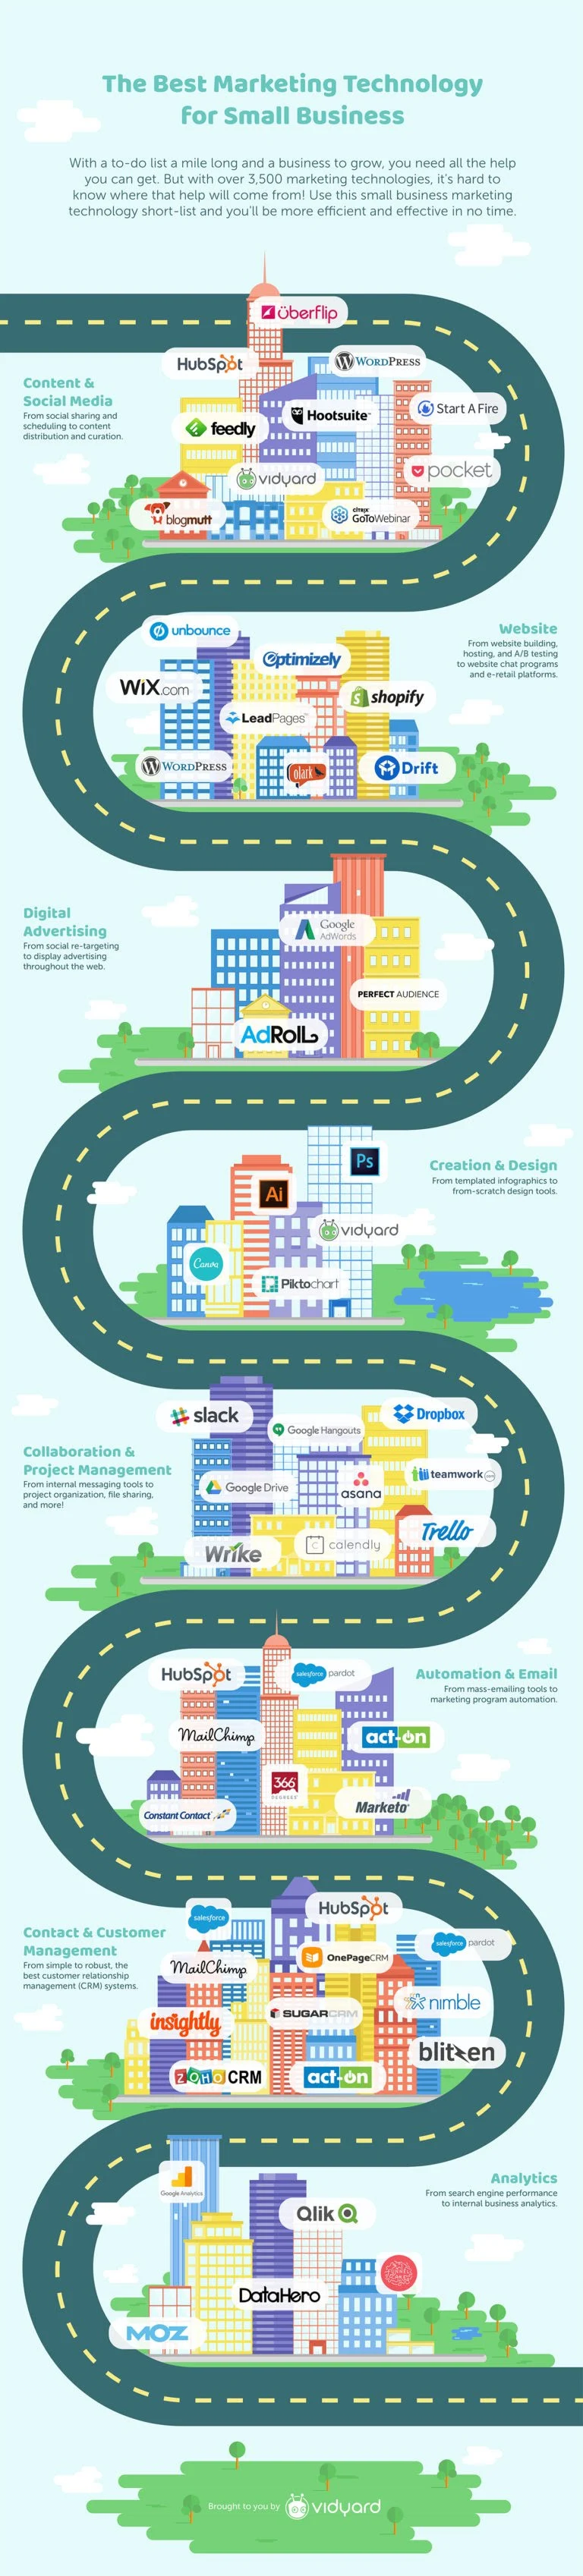 The Best Marketing Technology for Small Businesses - #Infographic